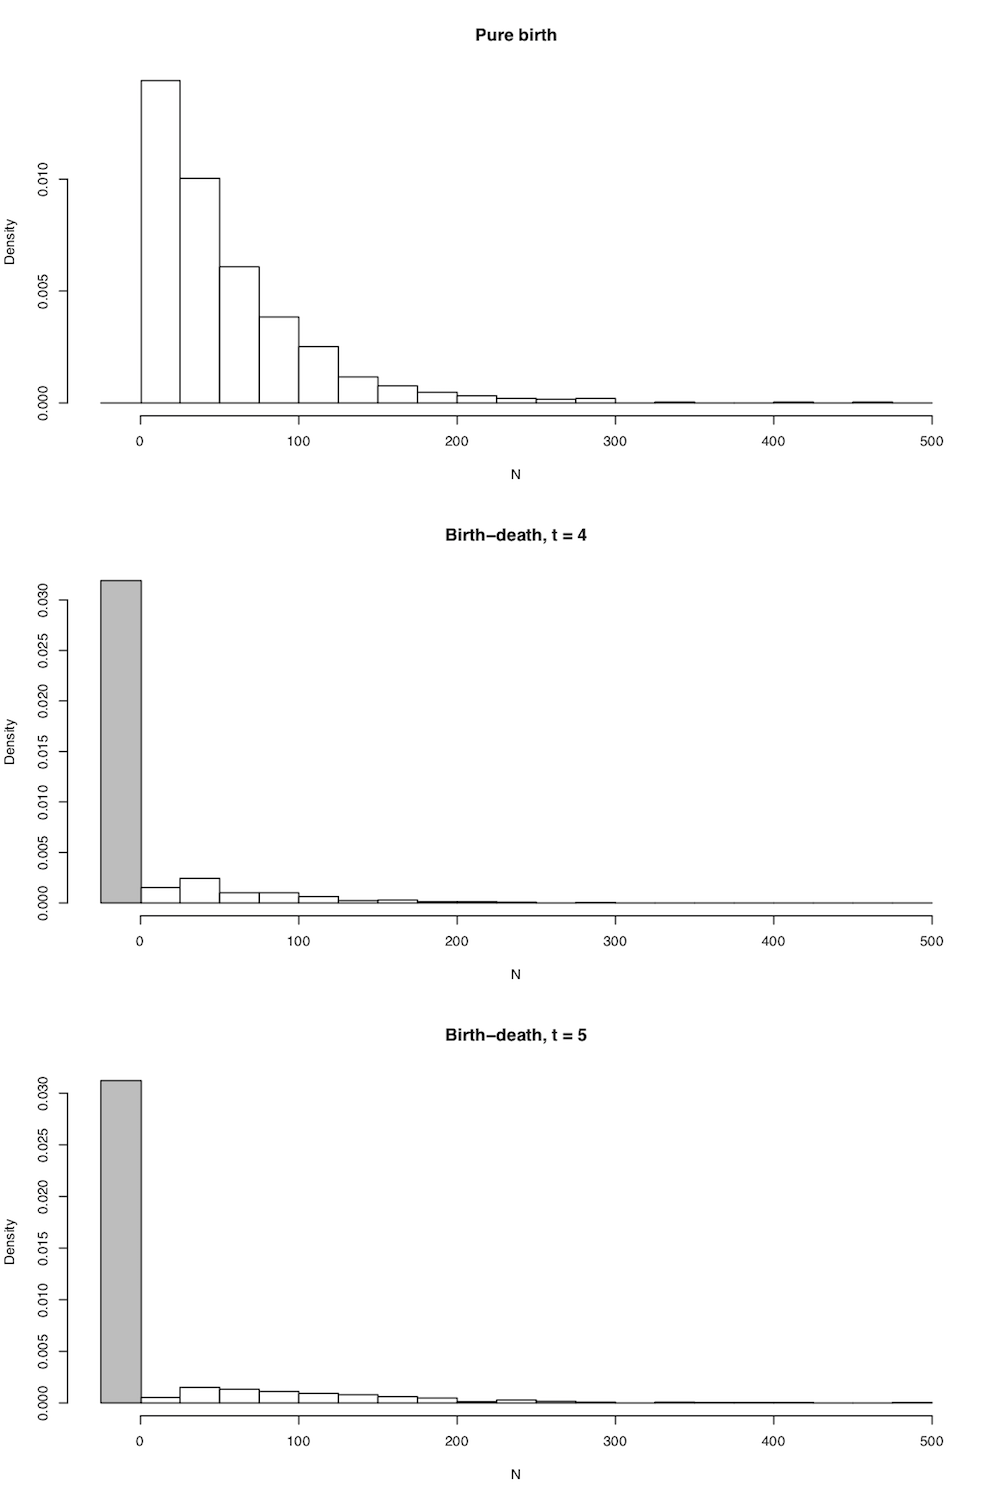 Figure 10.4. Probability distributions of N(t) under A. pure birth, B. birth death after a short time, and C. birth-death after a long time. Image by the author, can be reused under a CC-BY-4.0 license.